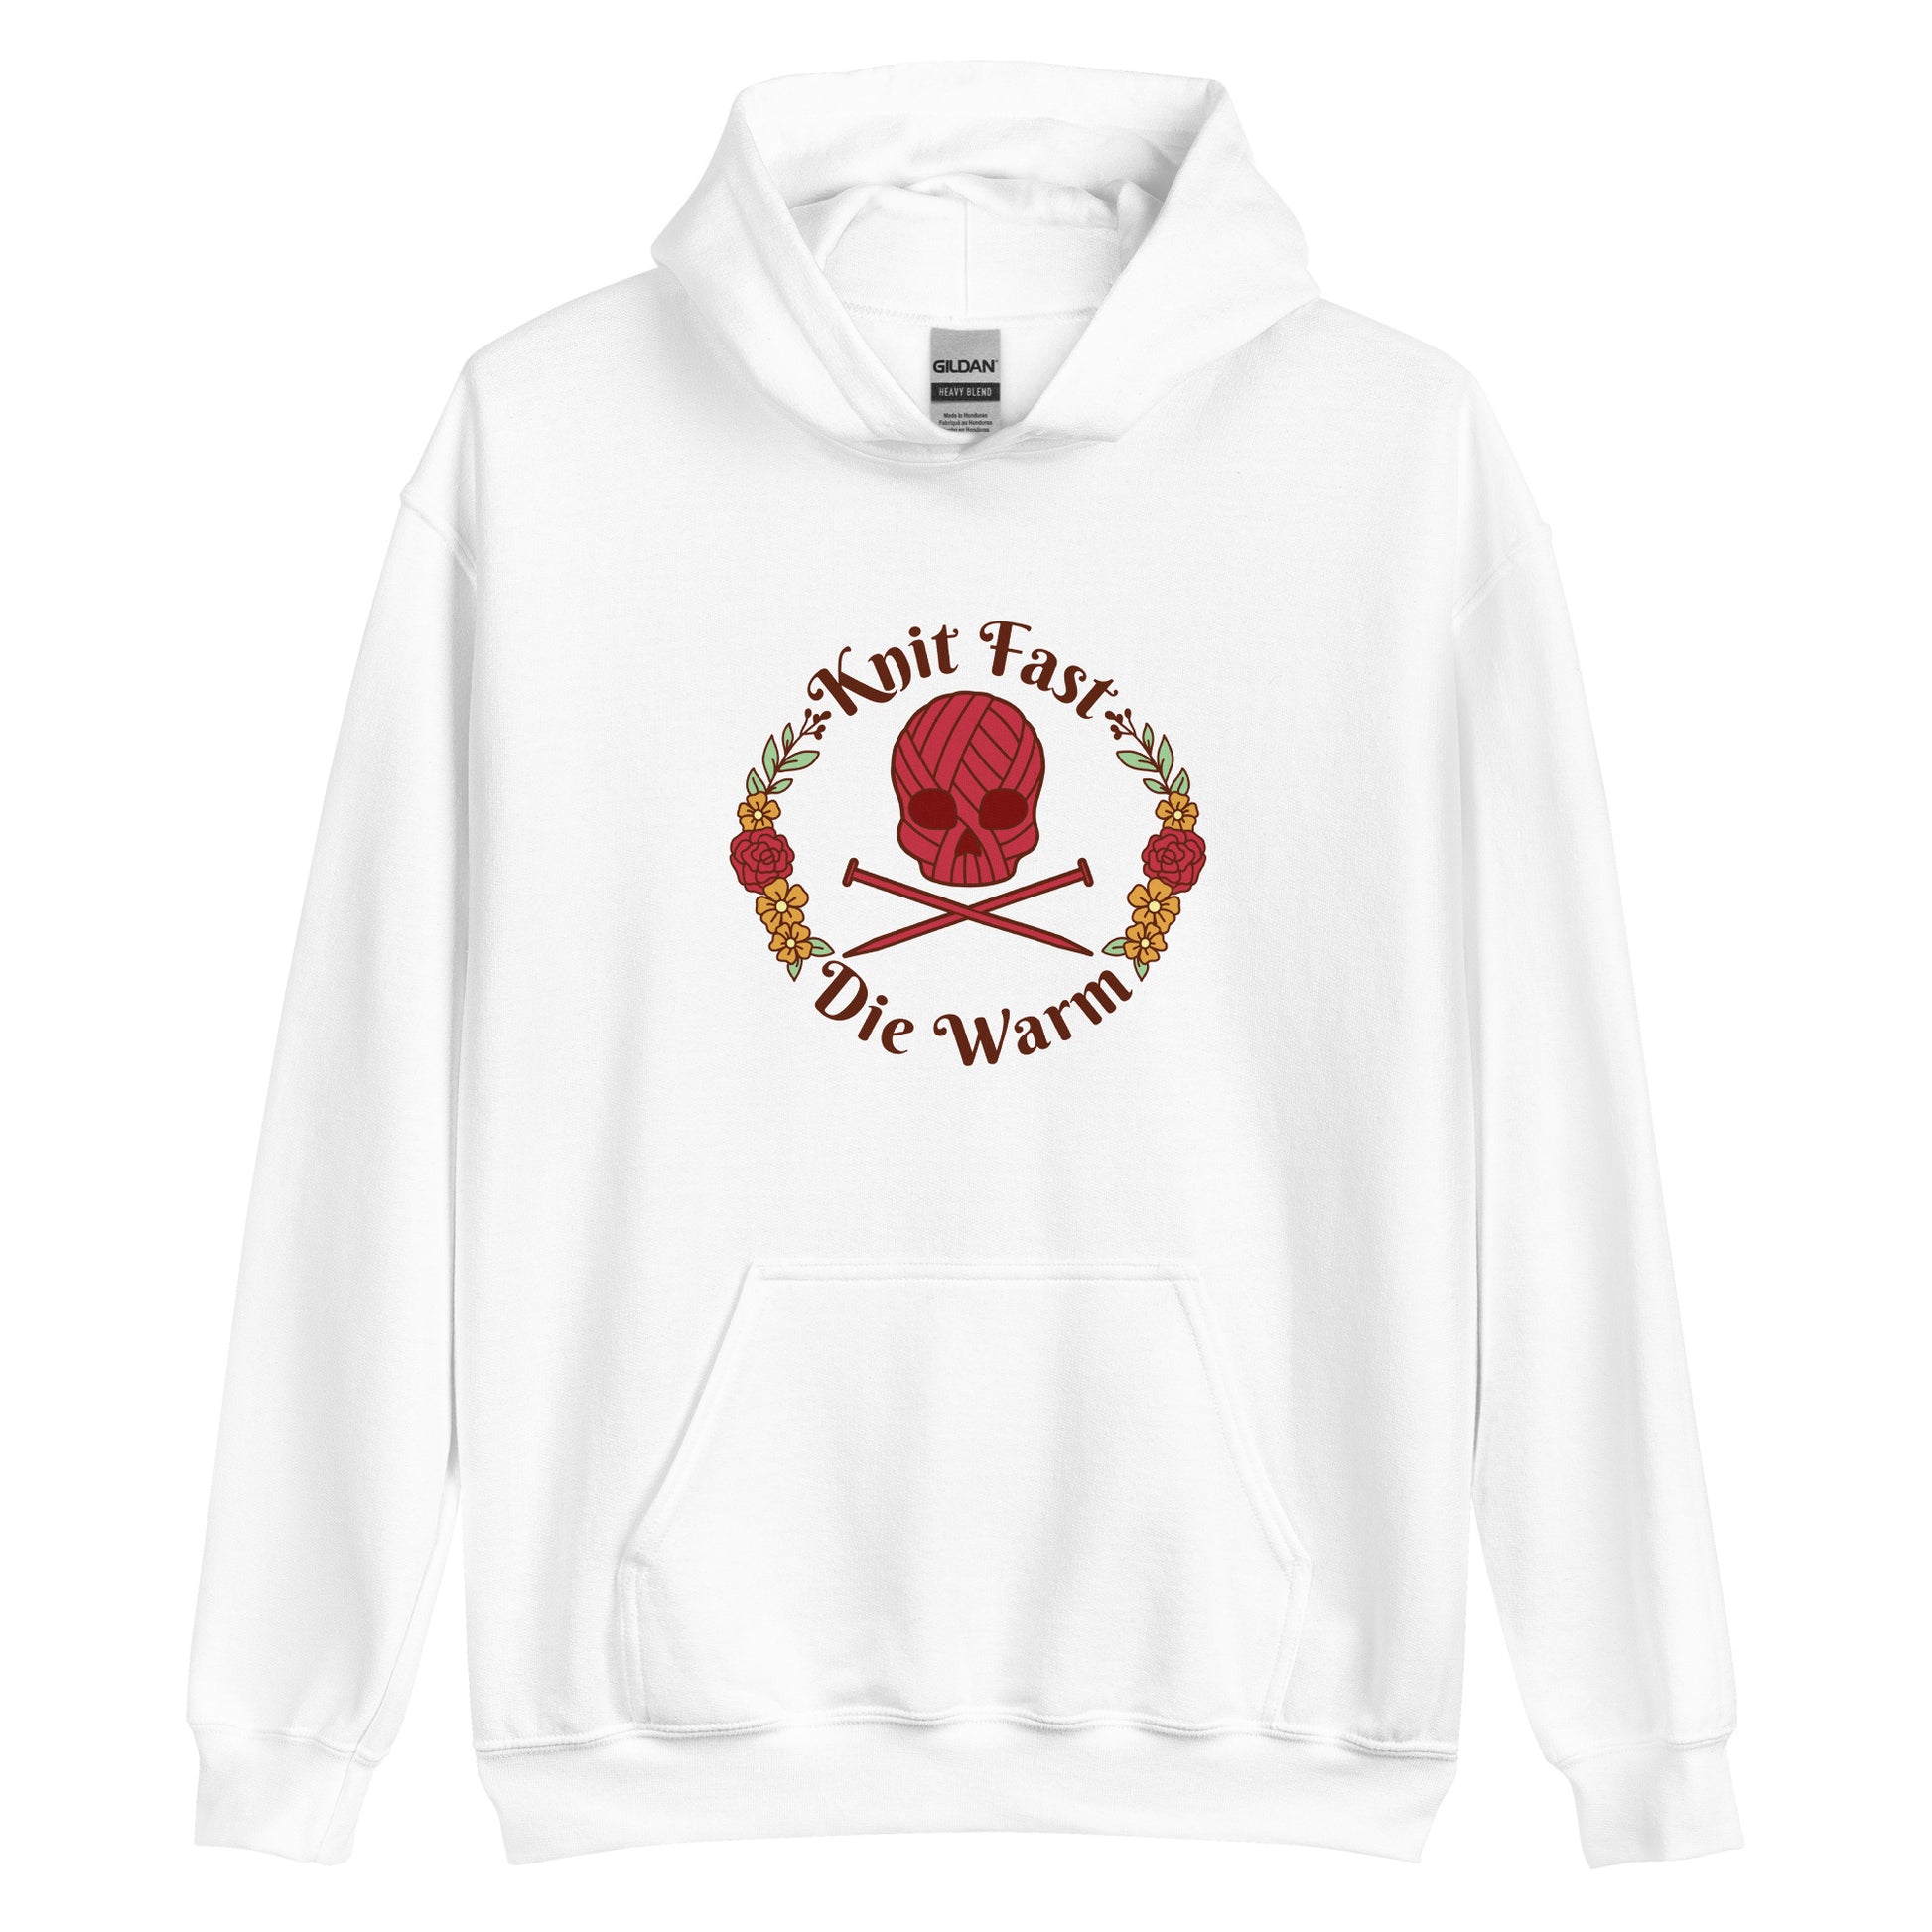 A white hooded sweatshirt featuring an image of a skull and crossbones made of yarn and knitting needles. A floral wreath surrounds the skull, along with words that read "Knit Fast, Die Warm"